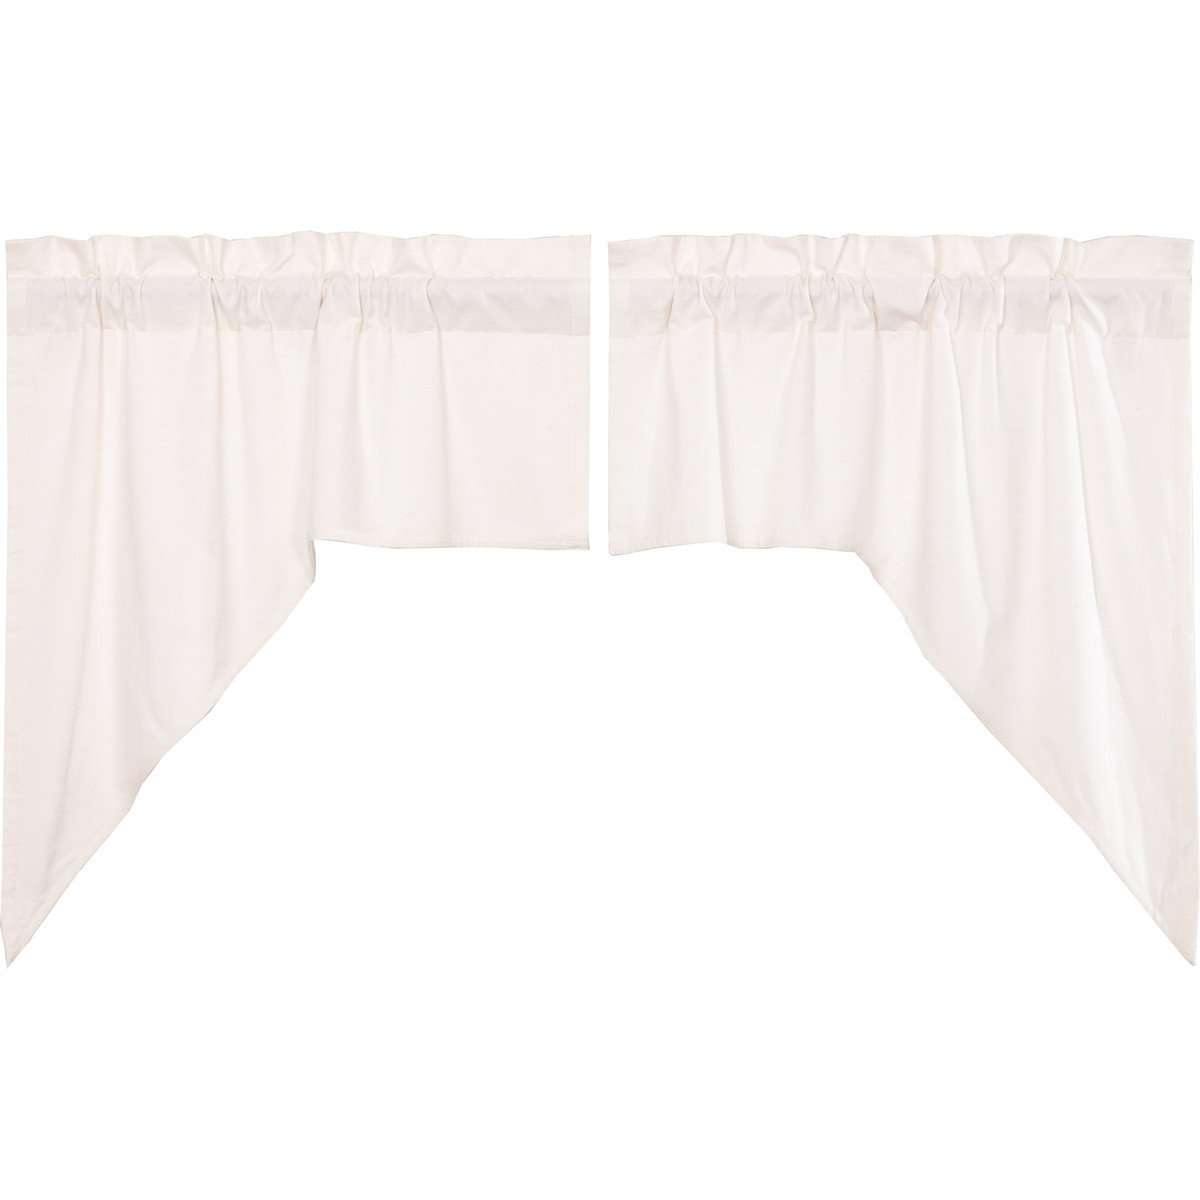 Simple Life Flax Antique White Swag Curtain Set of 2 36x36x16 VHC Brands - The Fox Decor